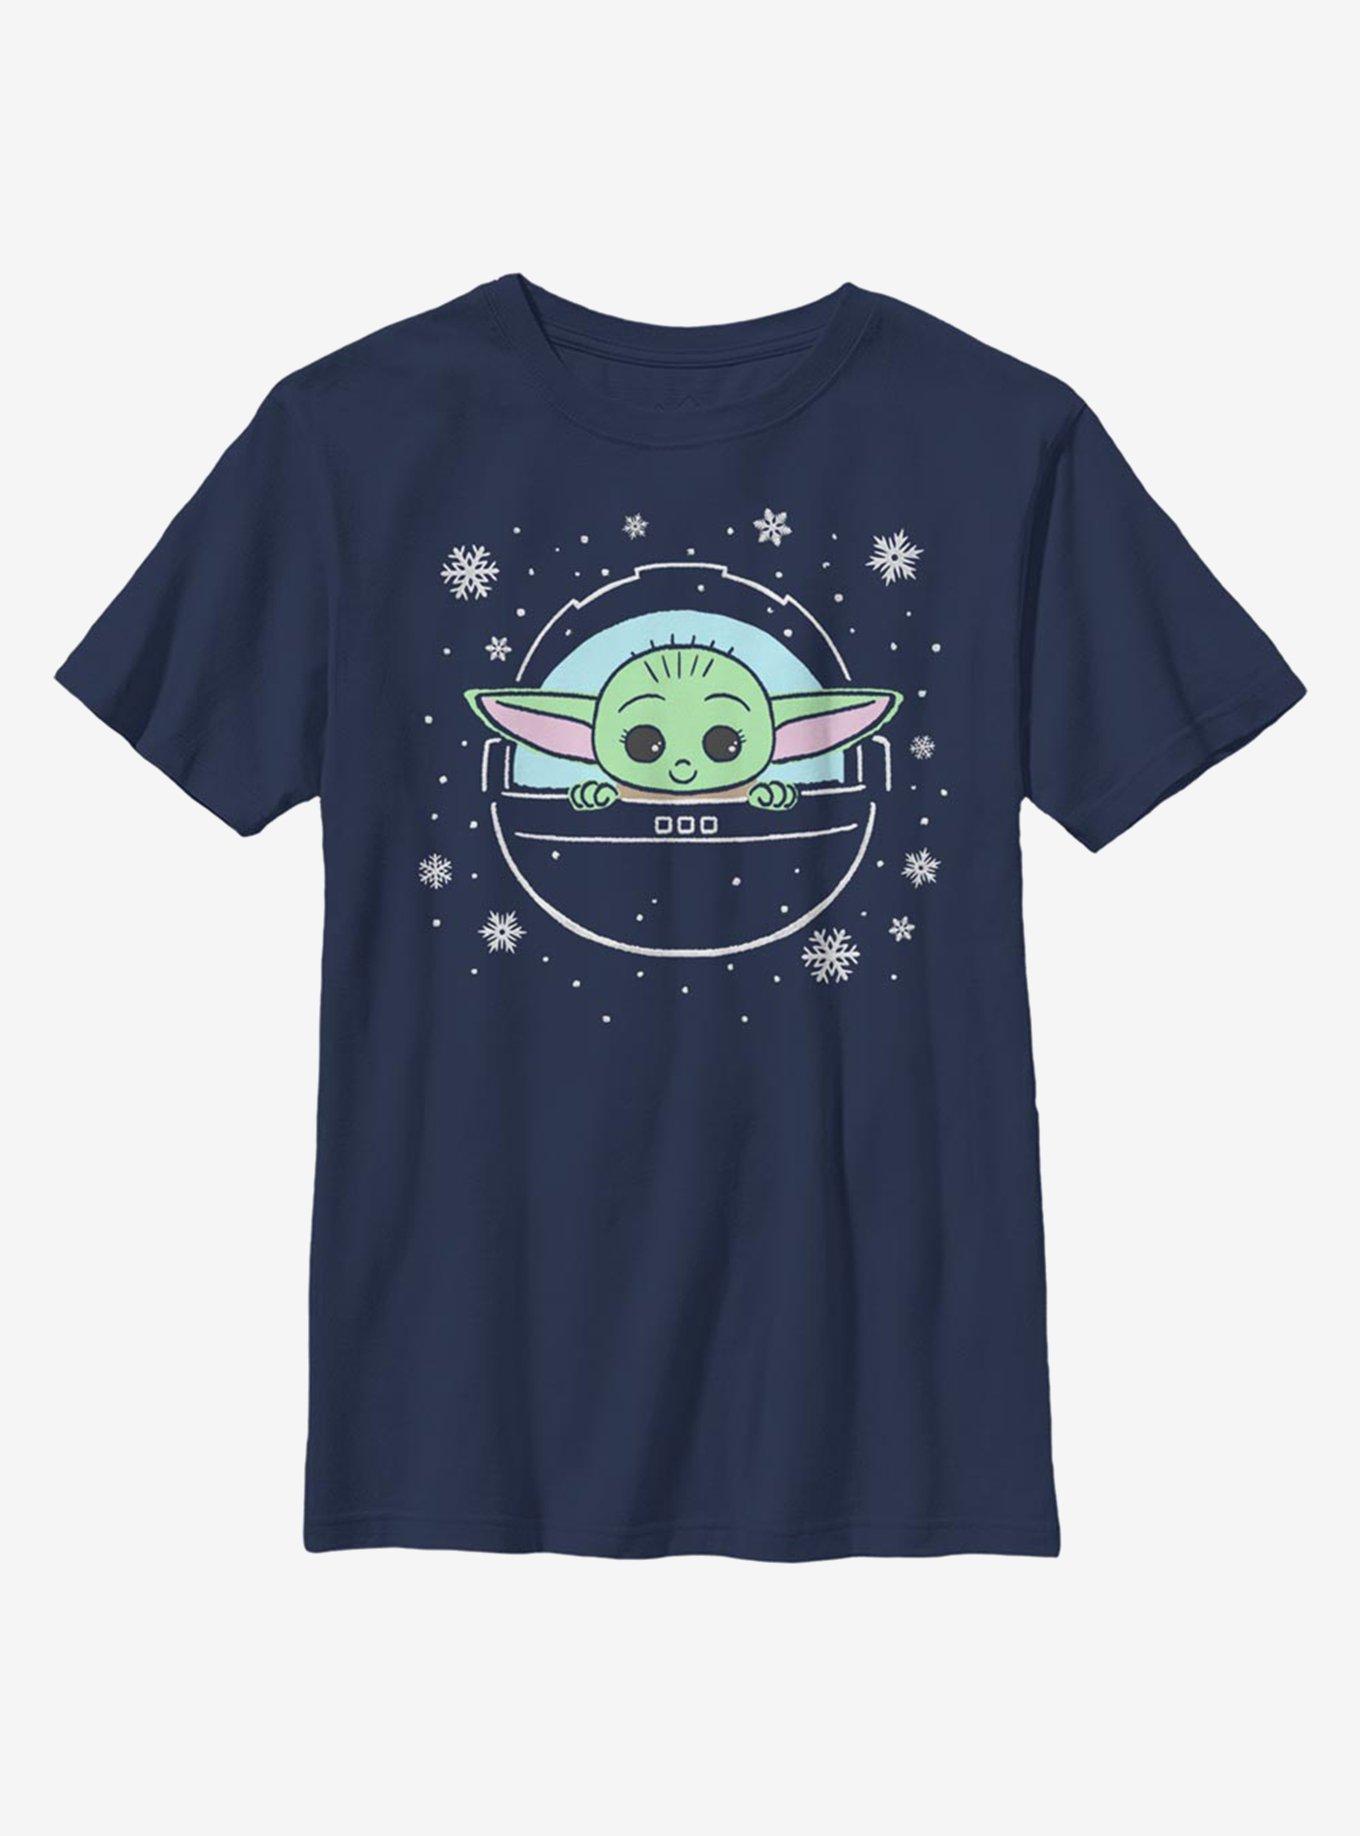 Star Wars The Mandalorian The Snow Child Youth T-Shirt, NAVY, hi-res